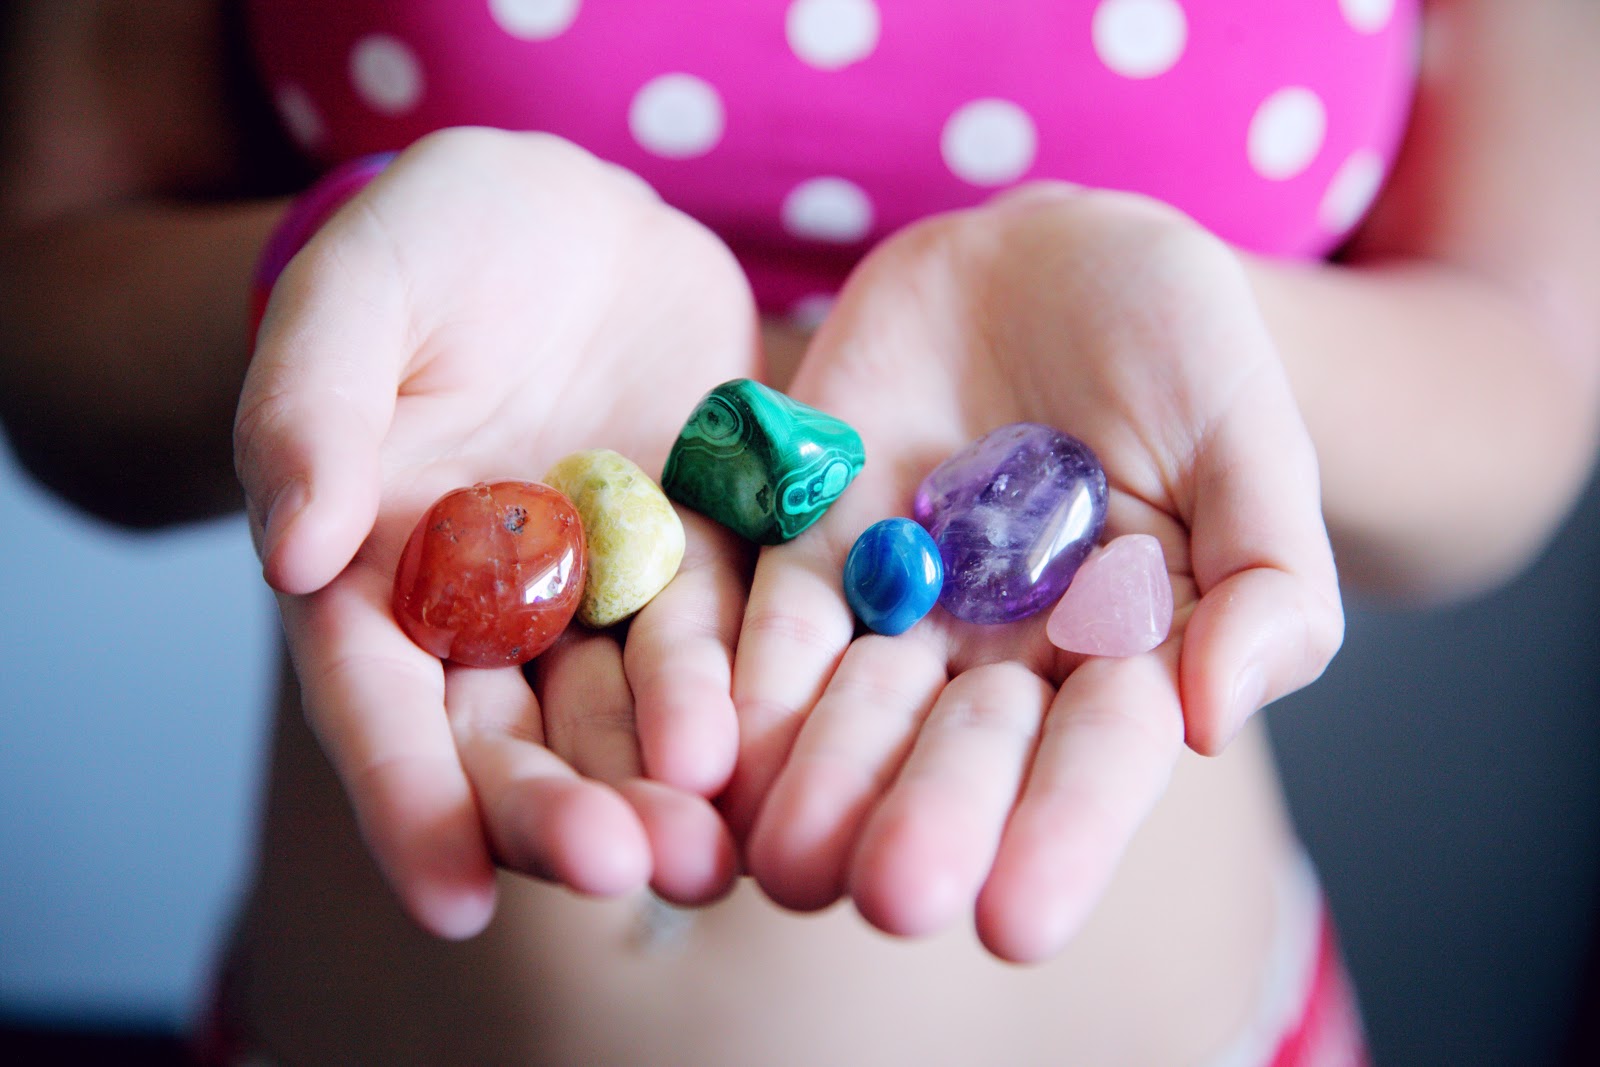 A photograph of a child holding colourful stones in their hands.